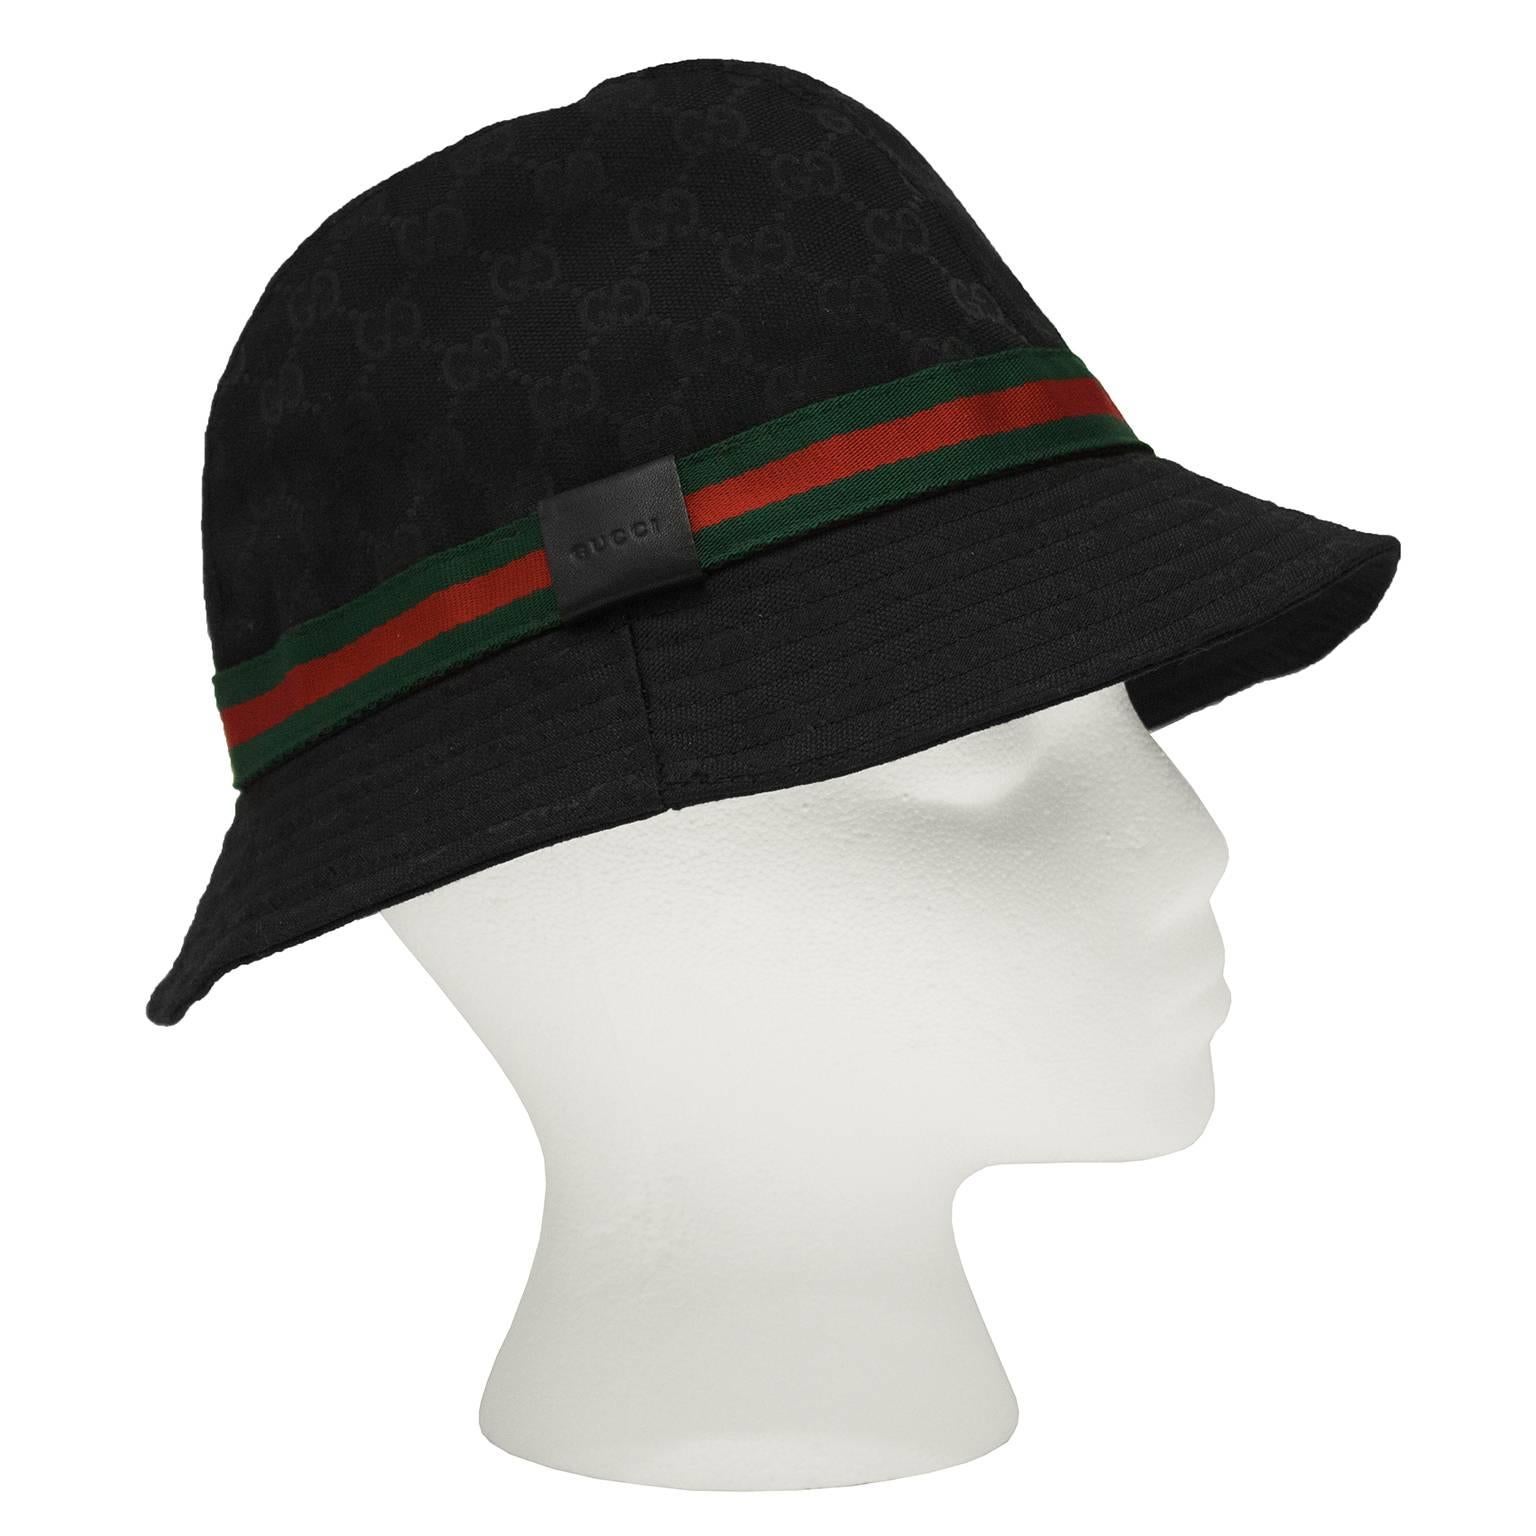 Gucci Bucket Hat - 6 For Sale on 1stDibs